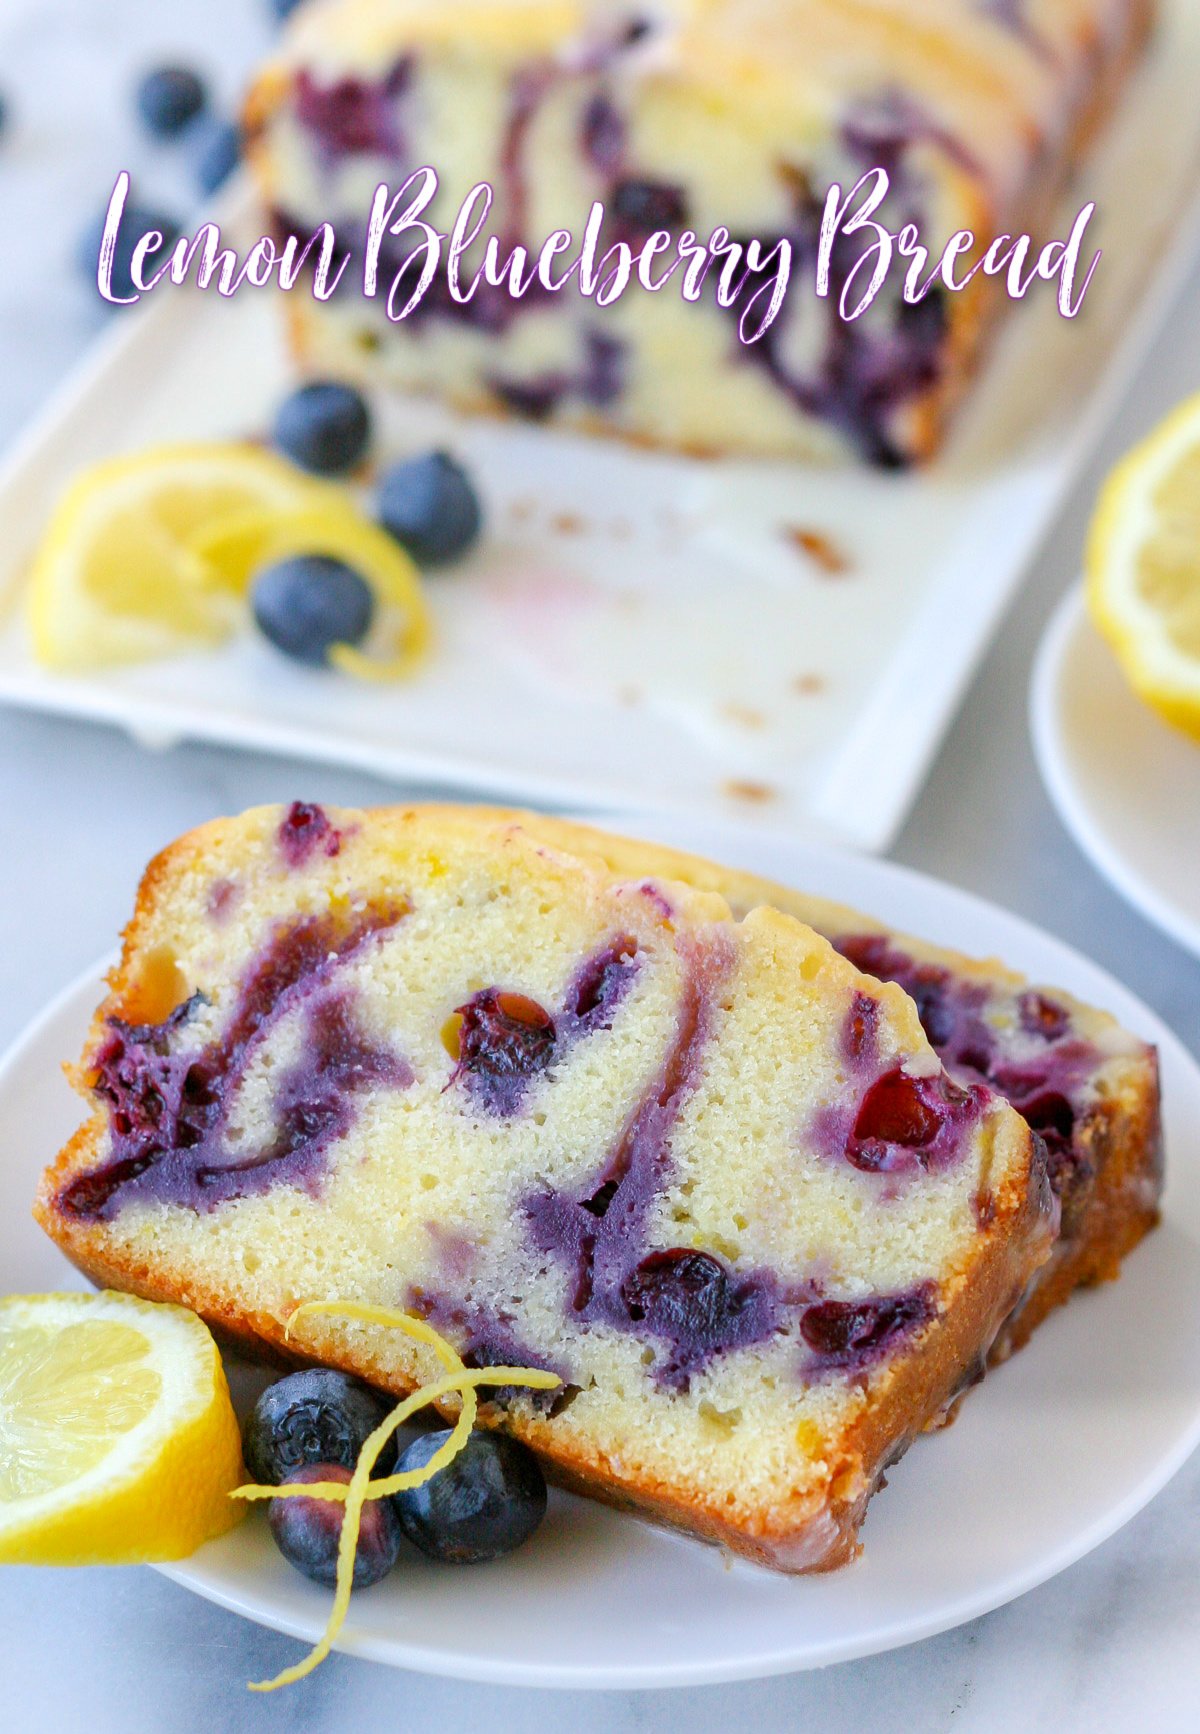 twos slices of lemon blueberry bread on white plate with title overlay